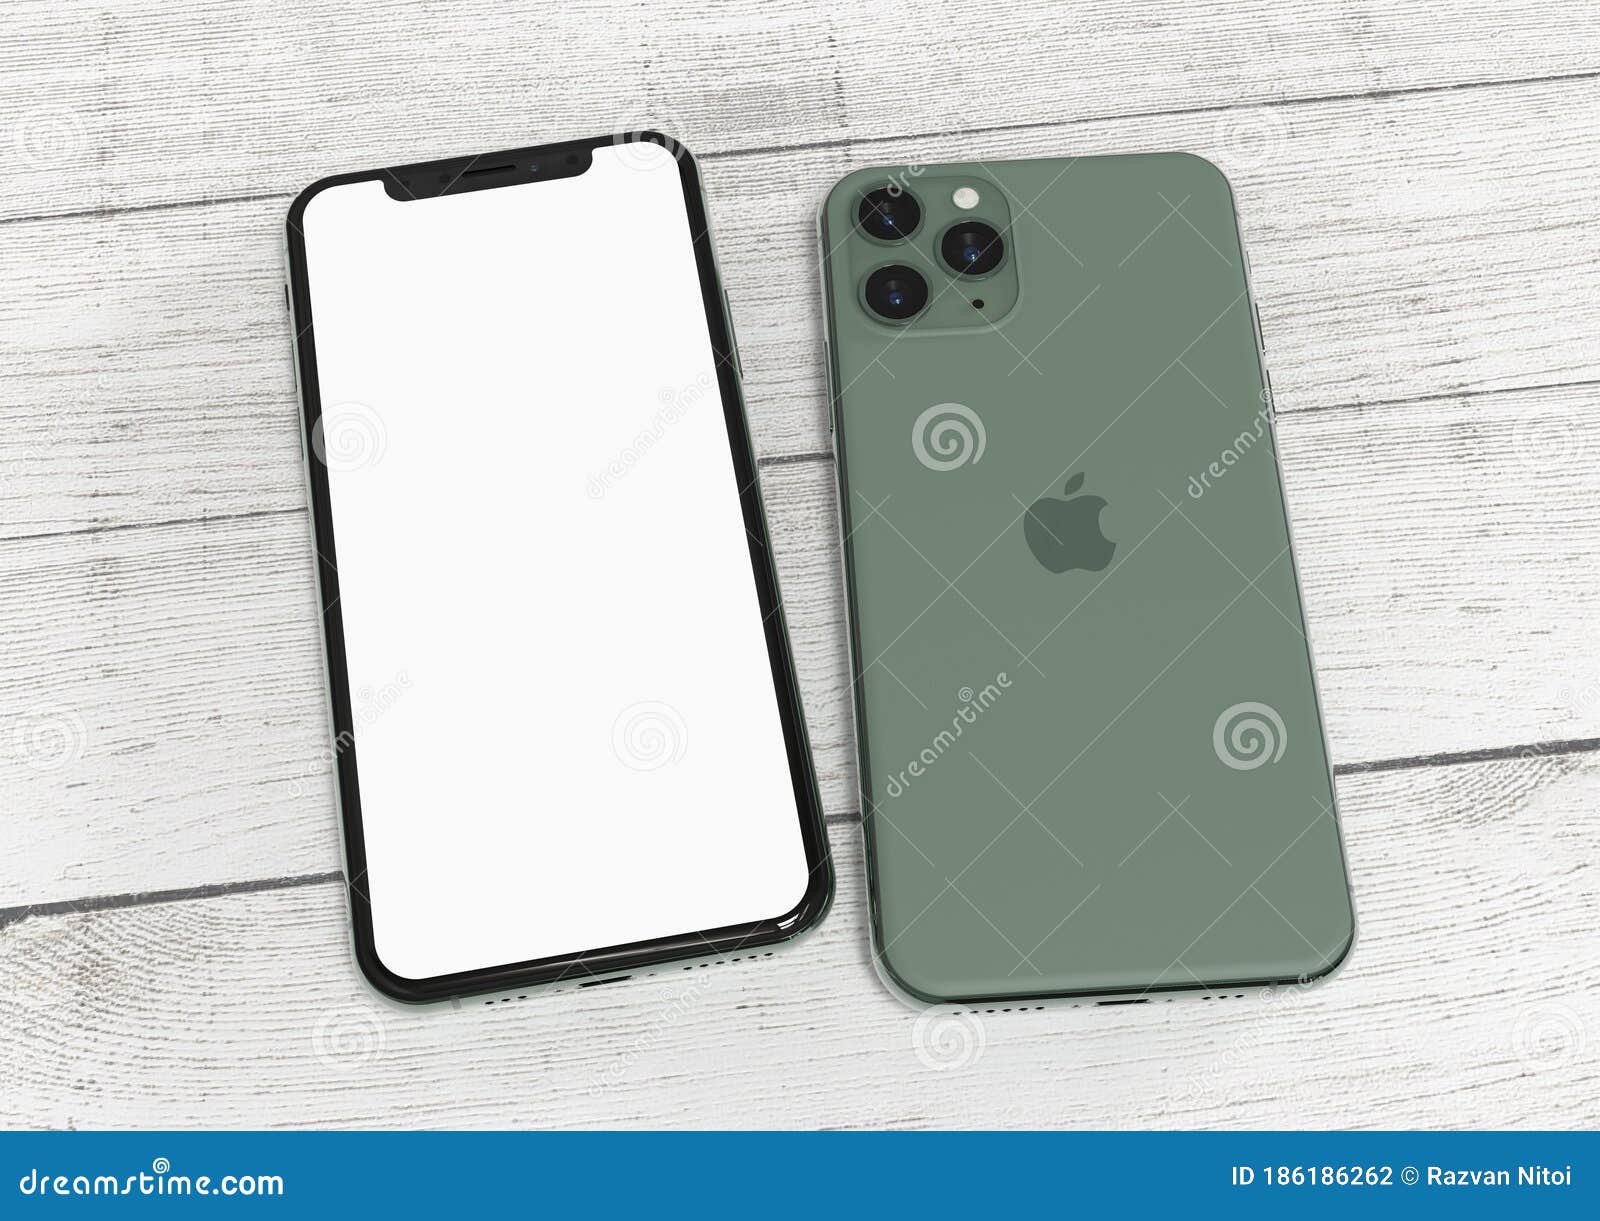 Apple Iphone 11 Pro Midnight Green Front And Back Sides Editorial Photography Image Of Design Grey